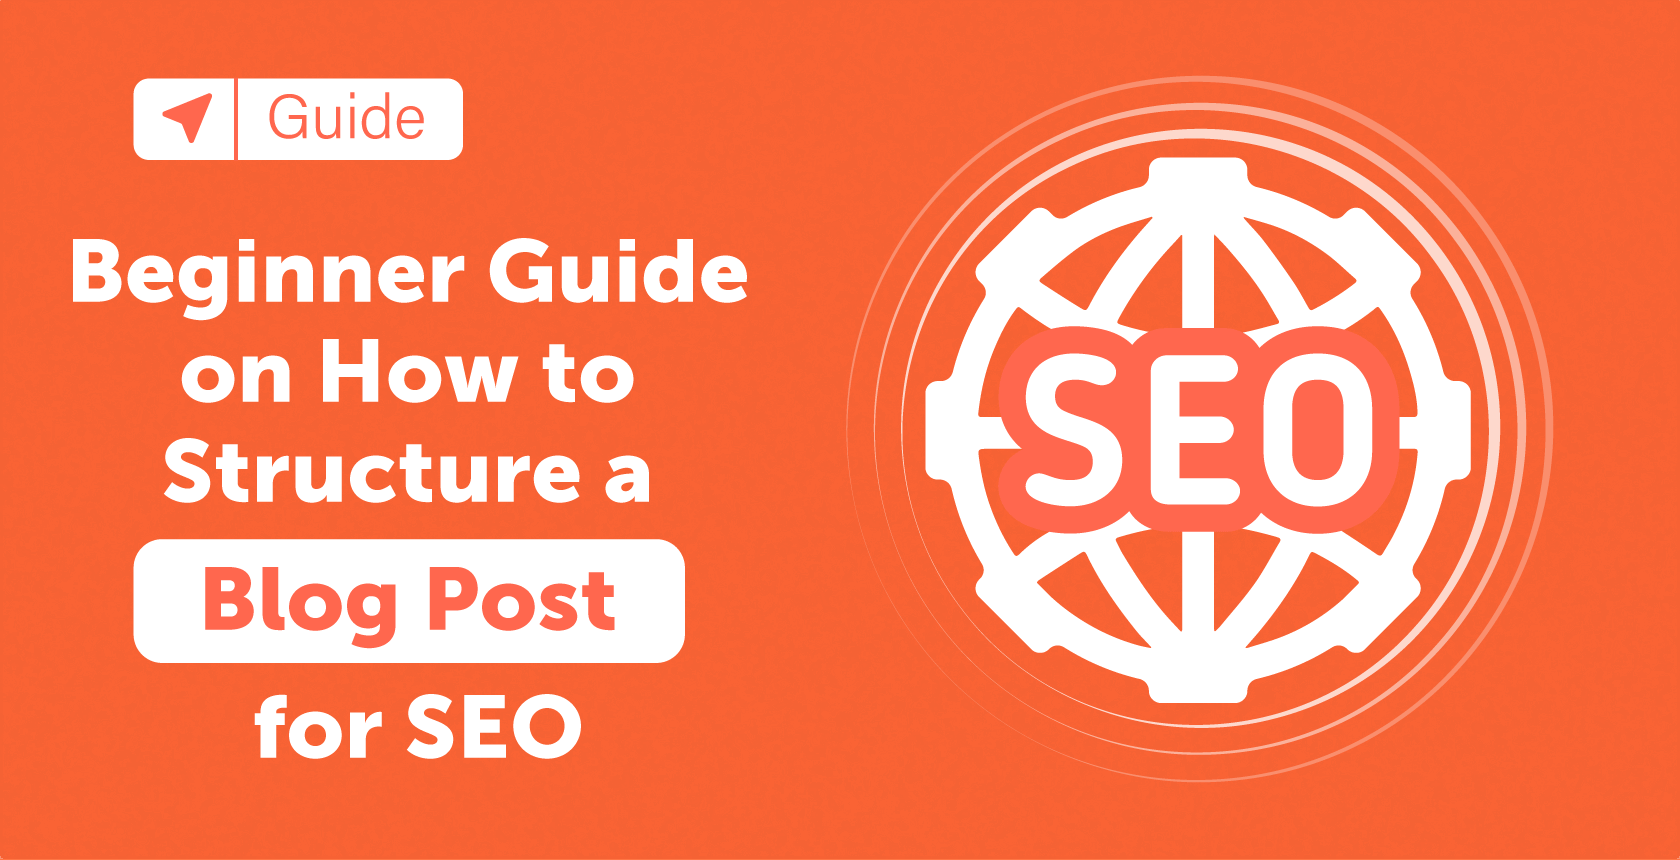 Beginner Guide on How to Structure a Blog Post for SEO